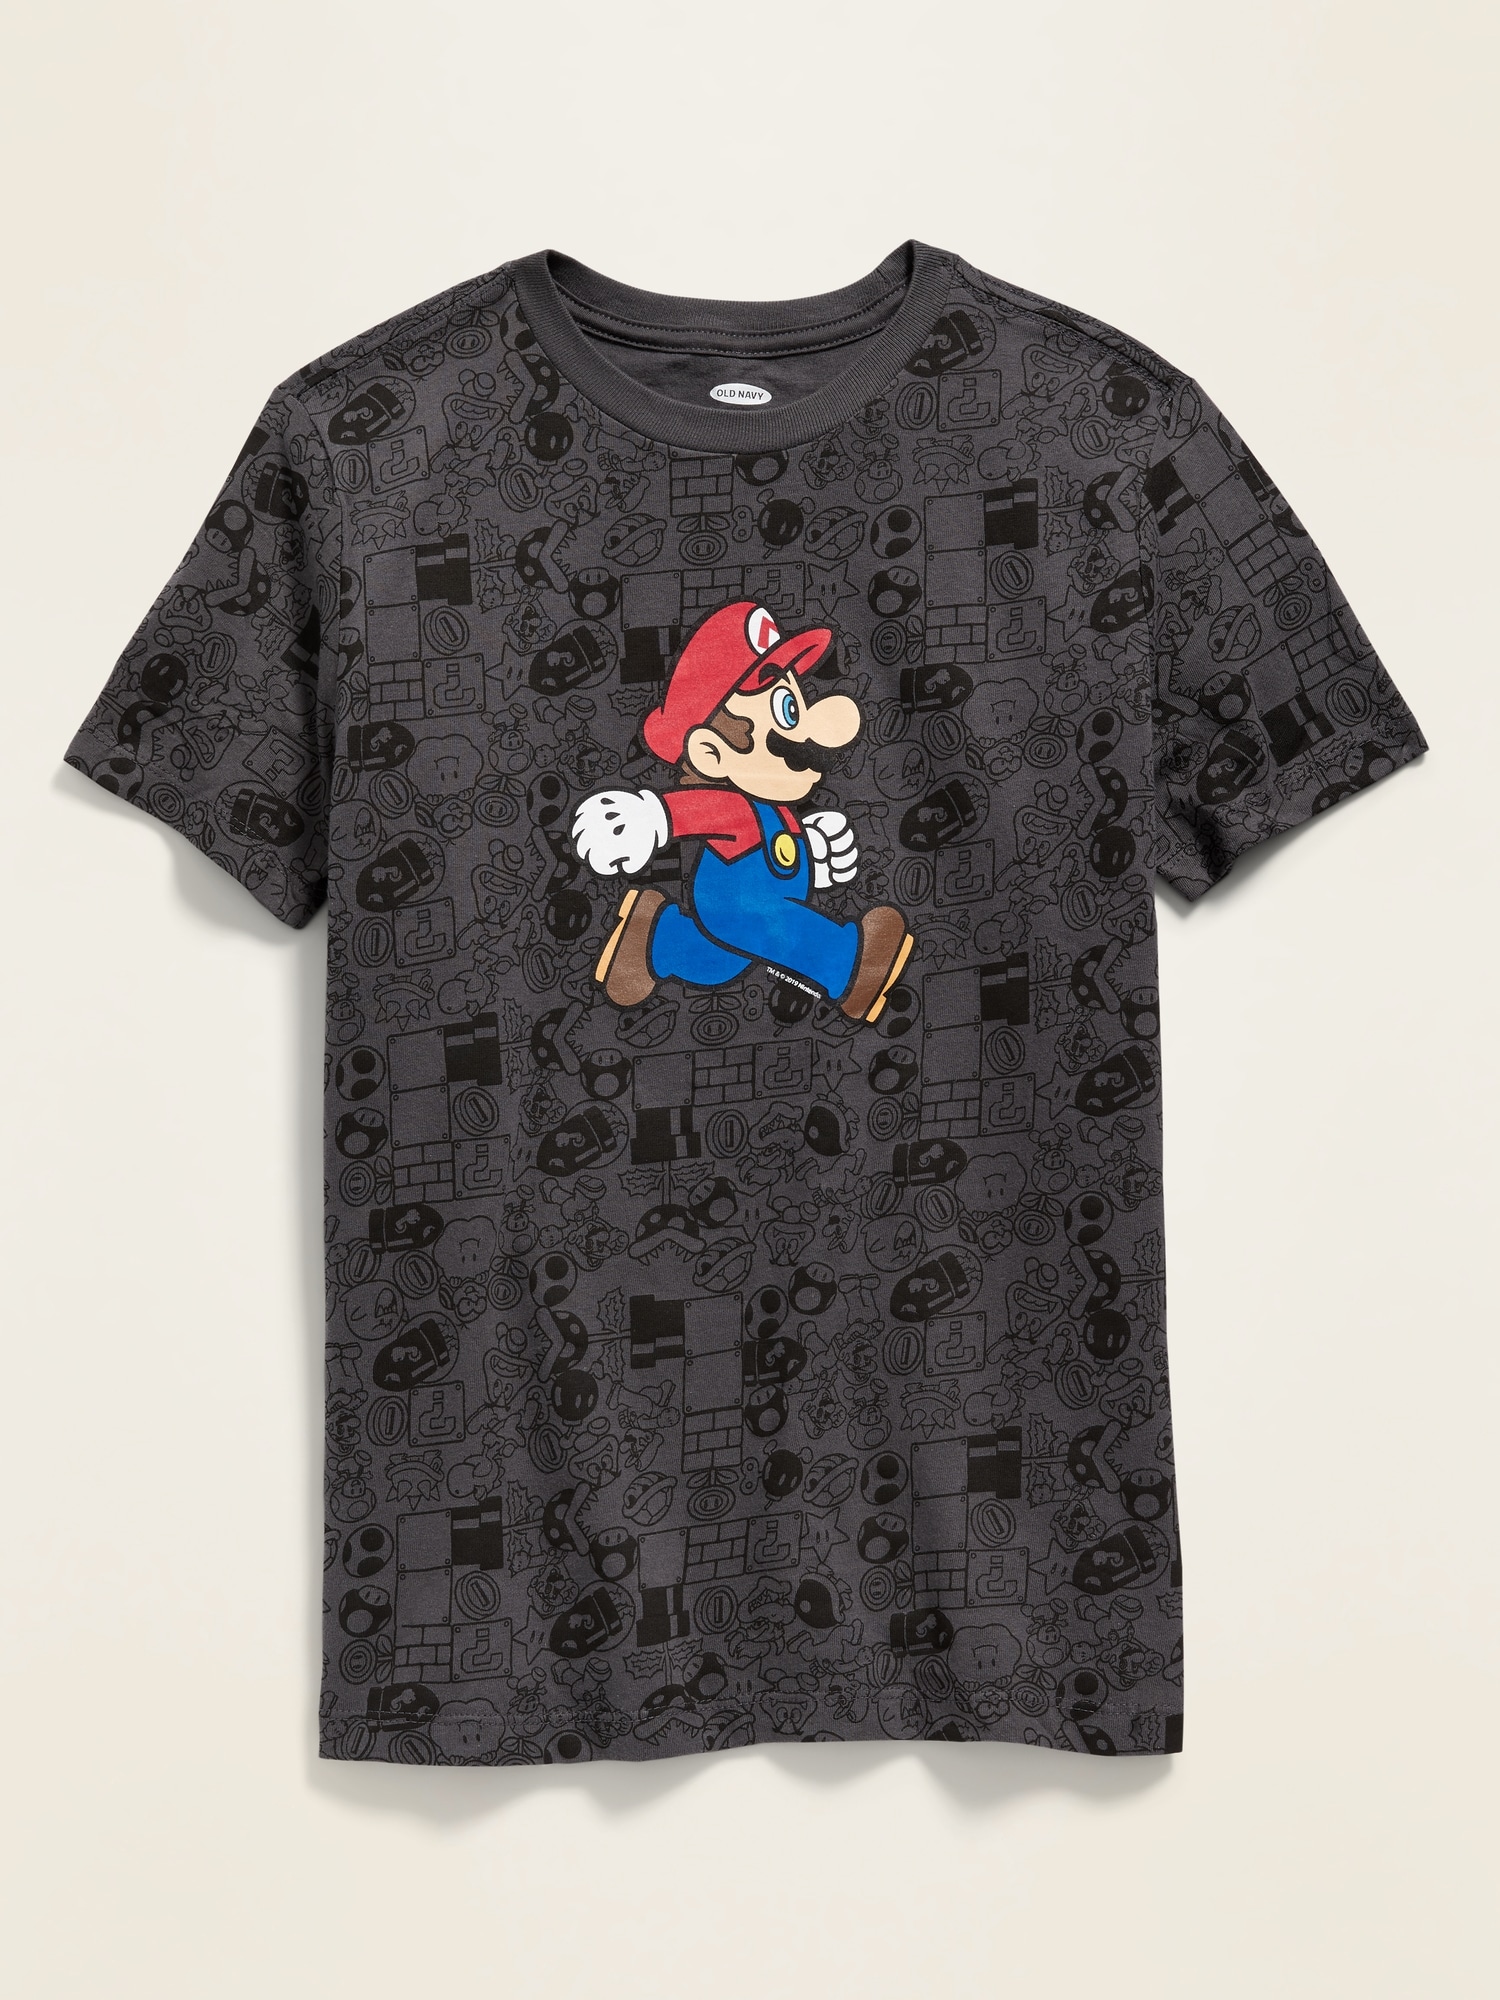 Gender-Neutral Super Mario™ Graphic Printed T-Shirt For Kids